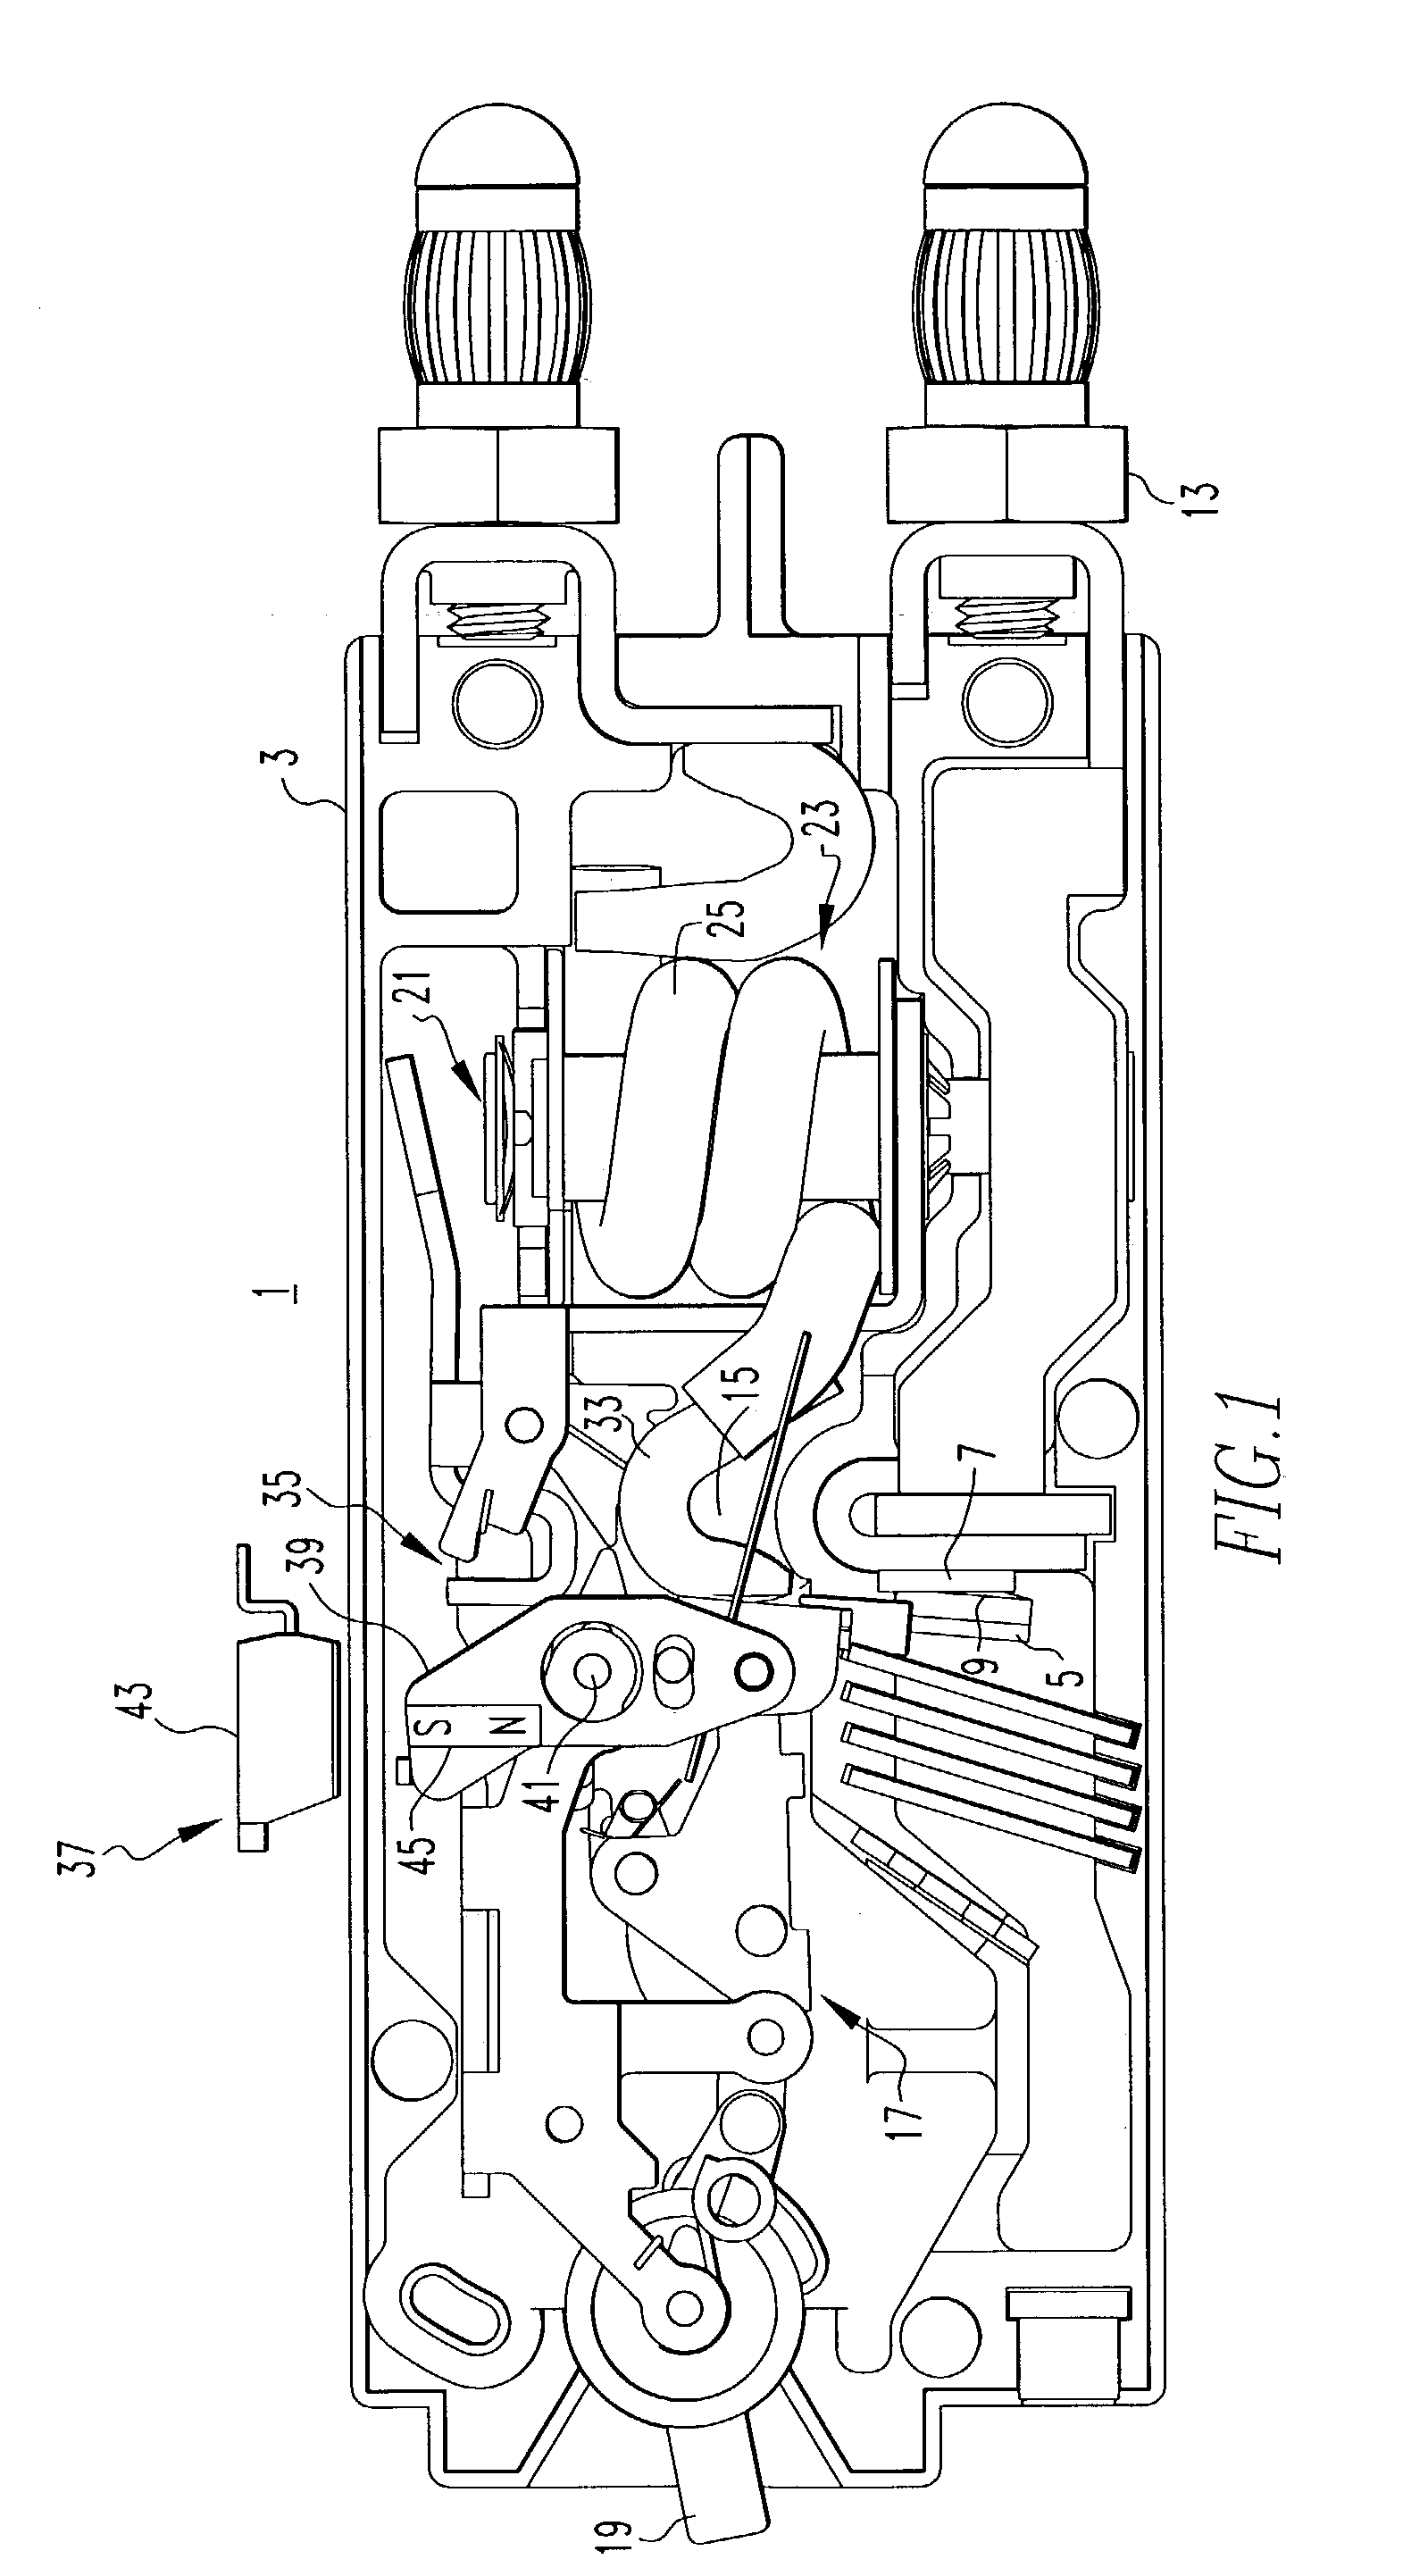 Non-contact auxiliary switch and electric power apparatus incorporating same